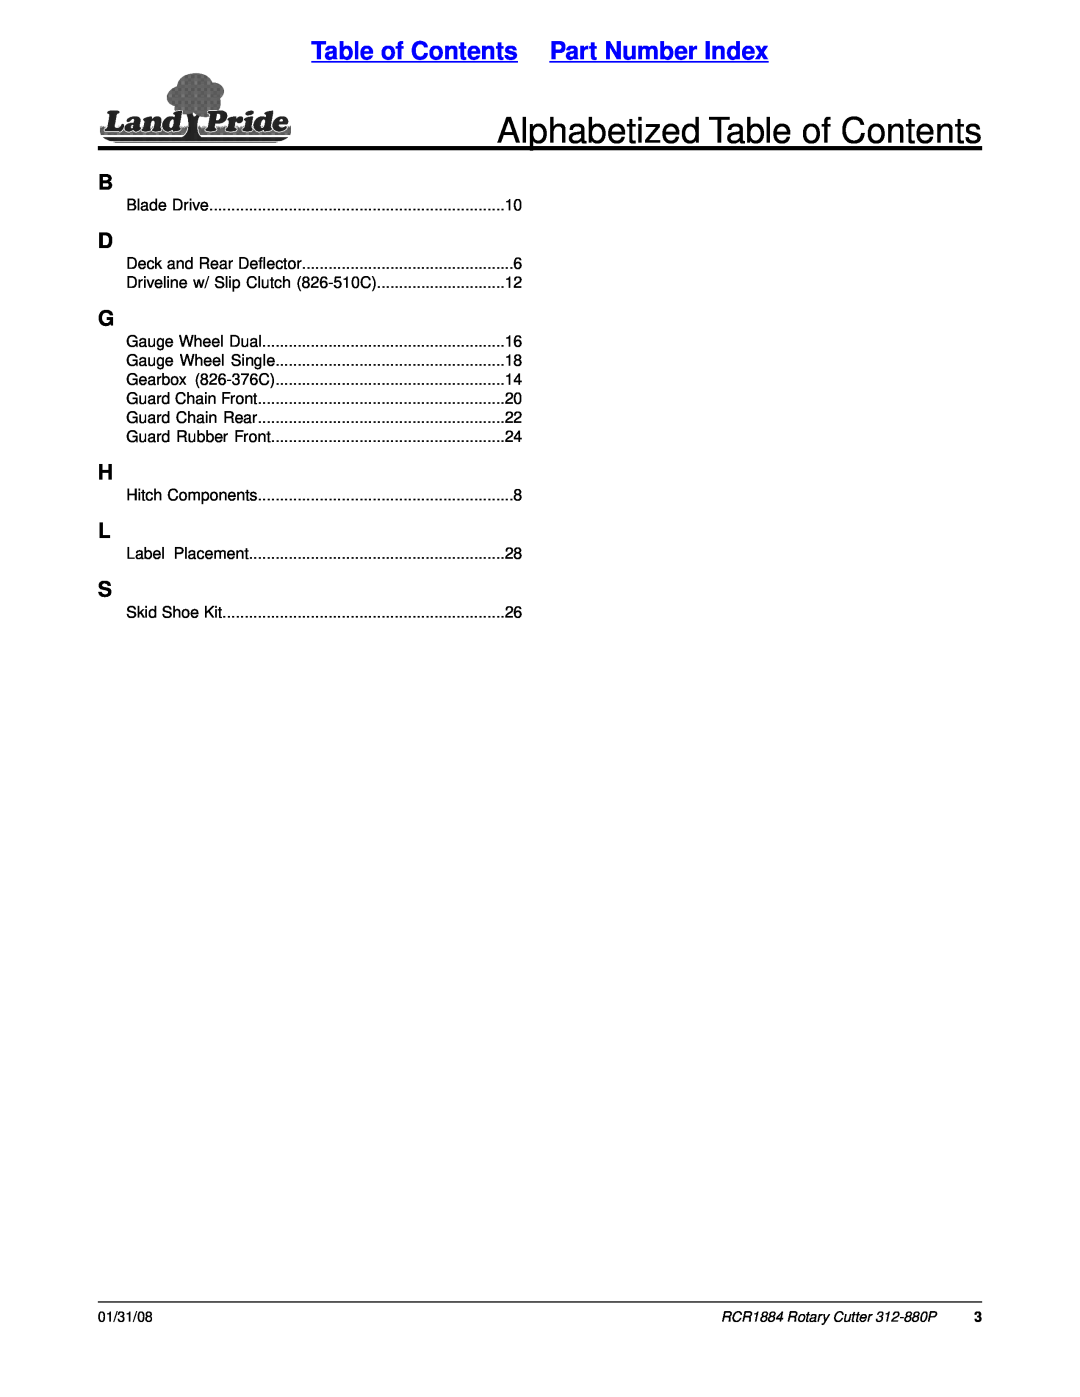 Land Pride RCR1884, Rotary Cutter manual Alphabetized Table of Contents, Table of Contents Part Number Index 